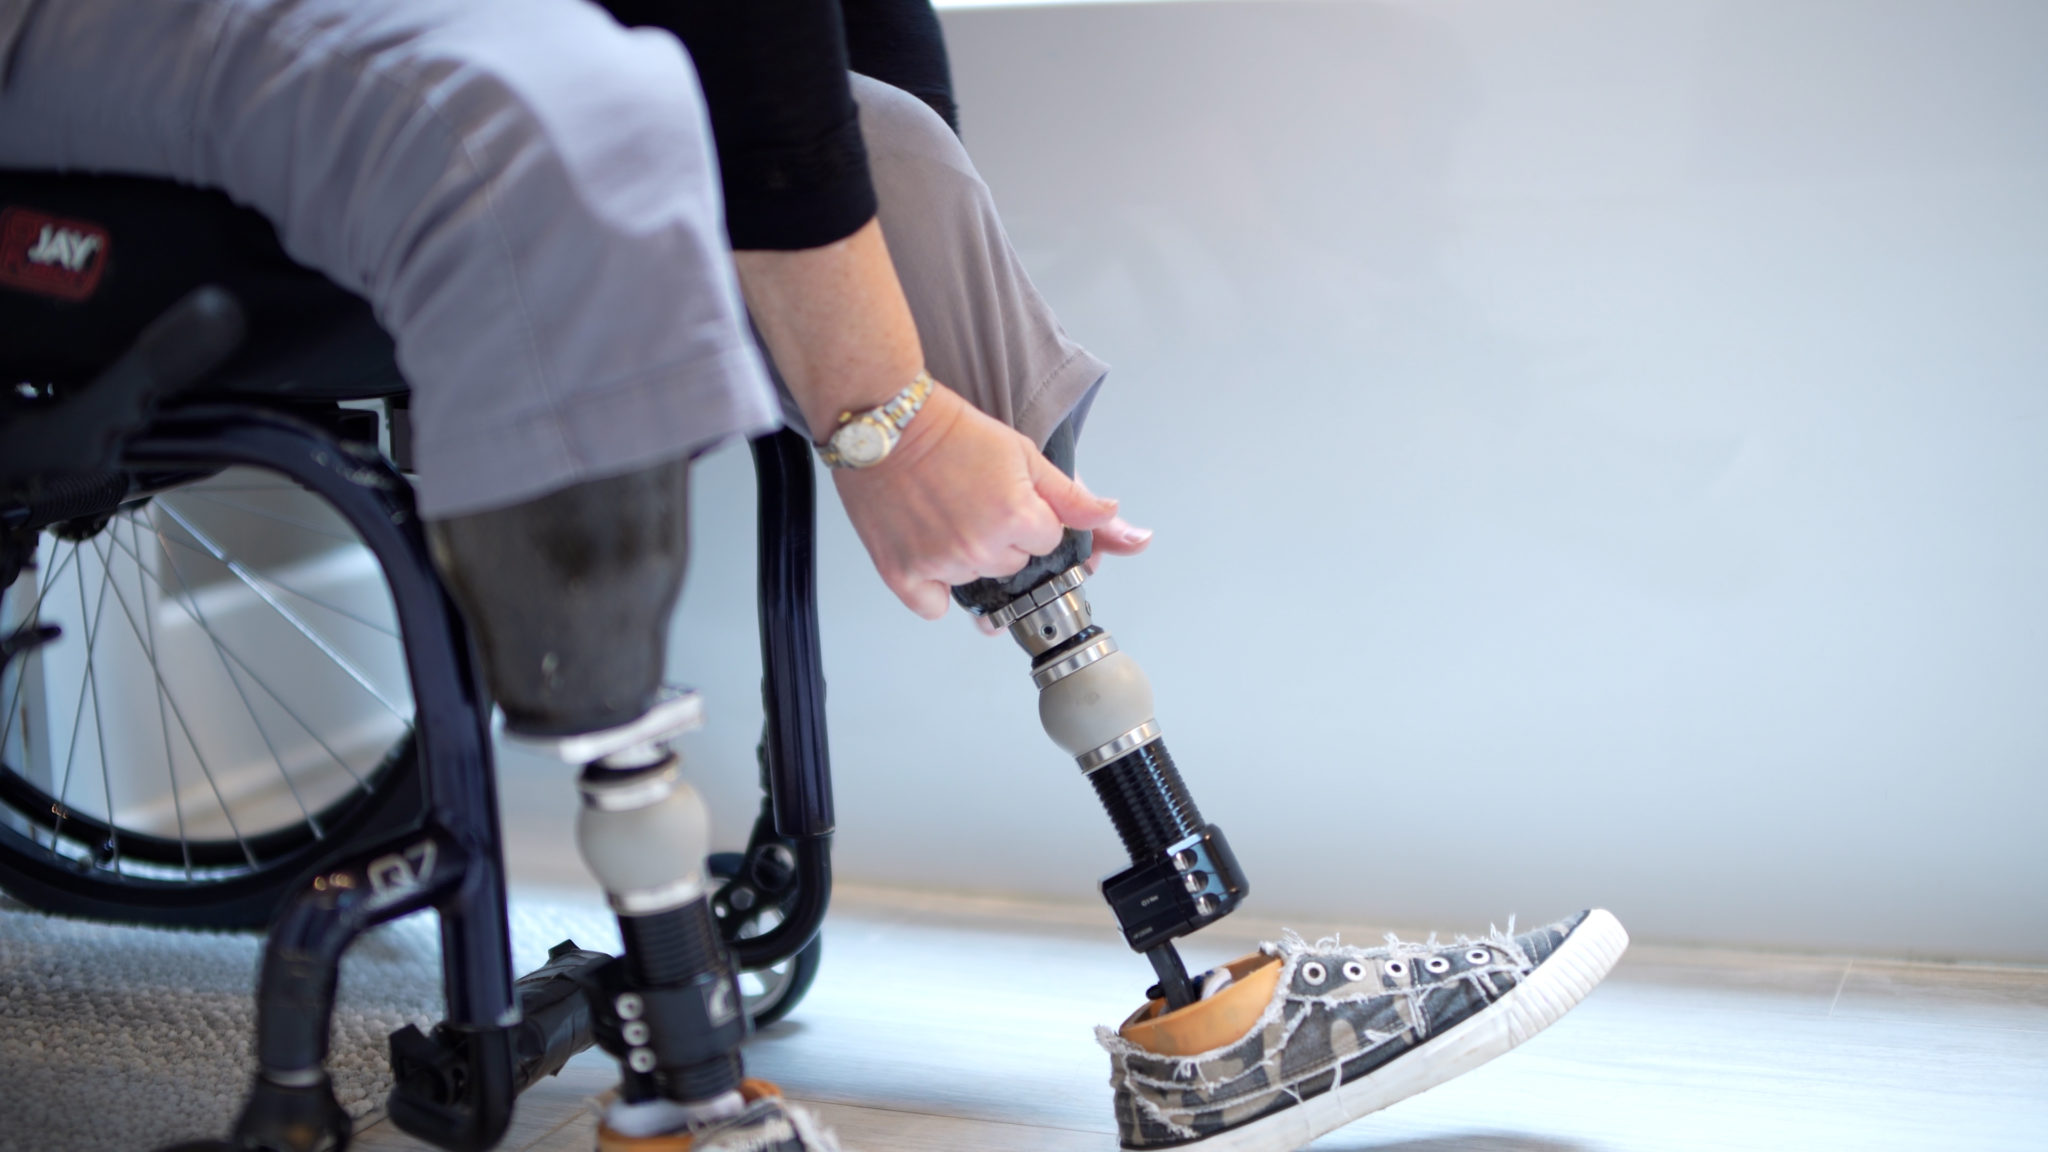 Different Types Of Lower-Limb Prostheses